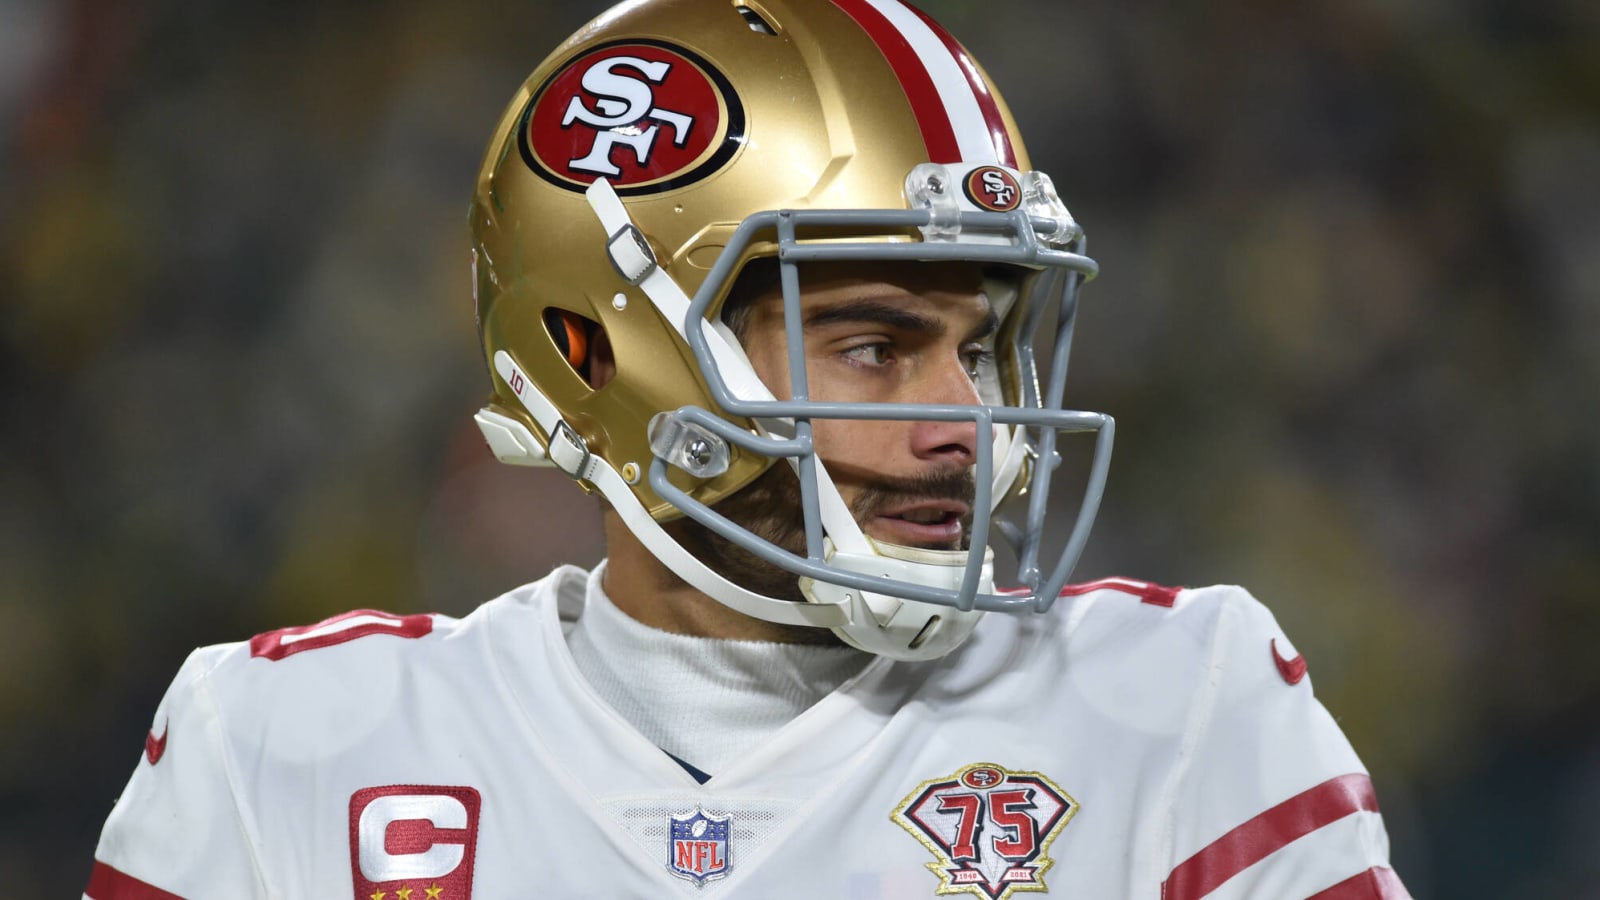 Former NFL RB says Jimmy Garoppolo gives 49ers 'best chance to win